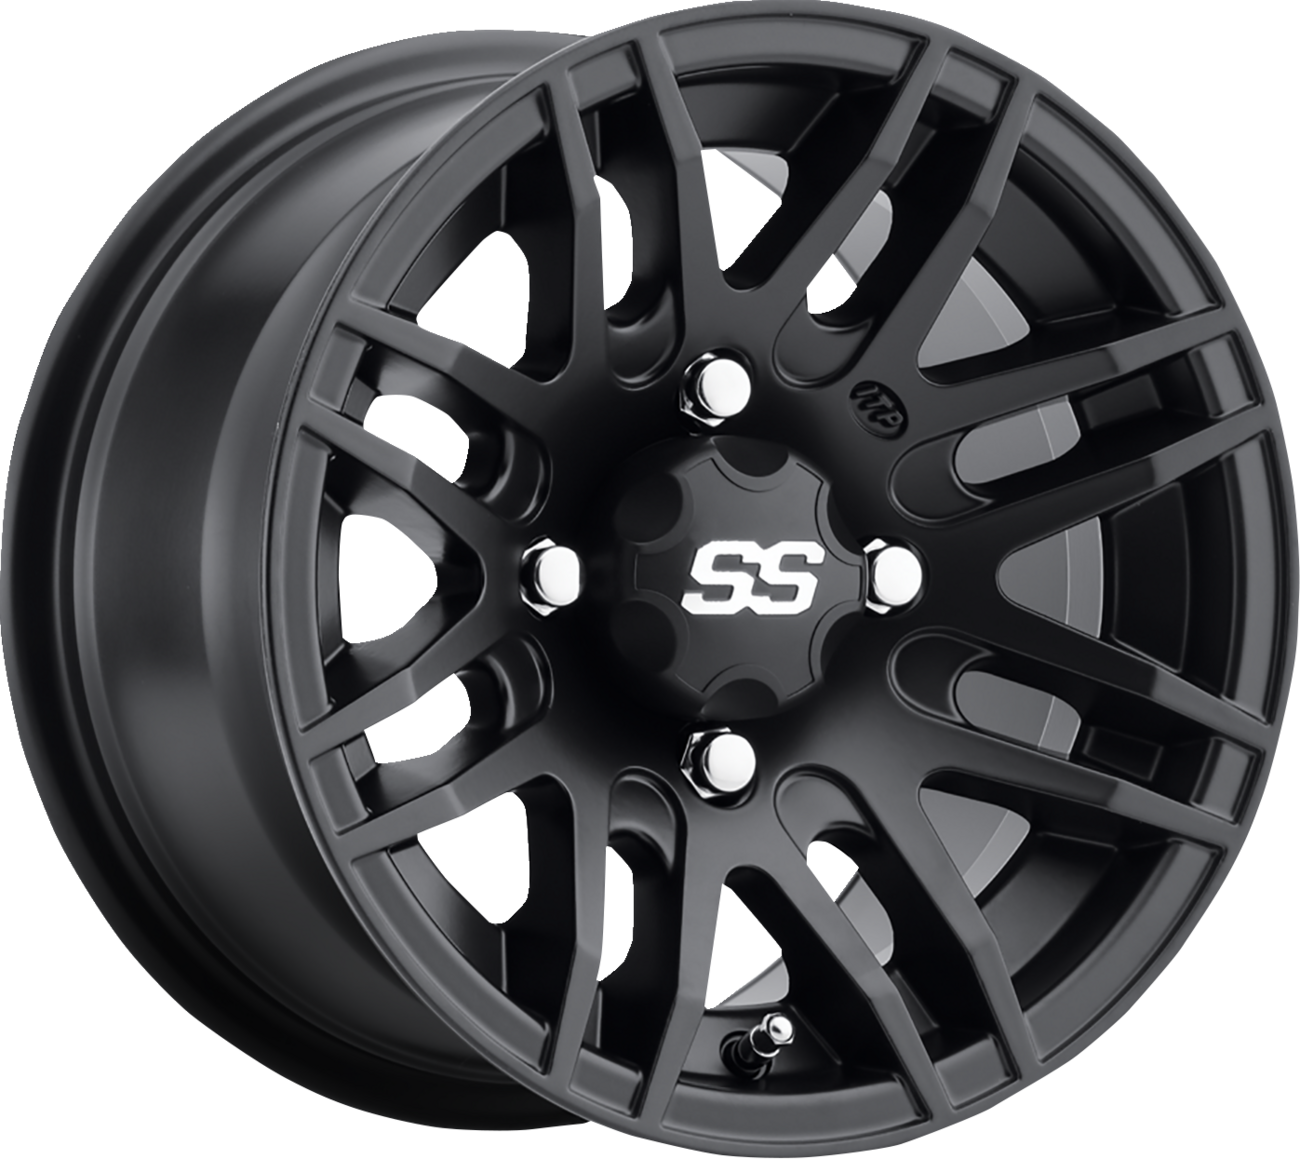 ITP SS316 Alloy Wheel - Front/Rear - Machined Black - 12x7 - 4/110 - 5+2 1228554536B